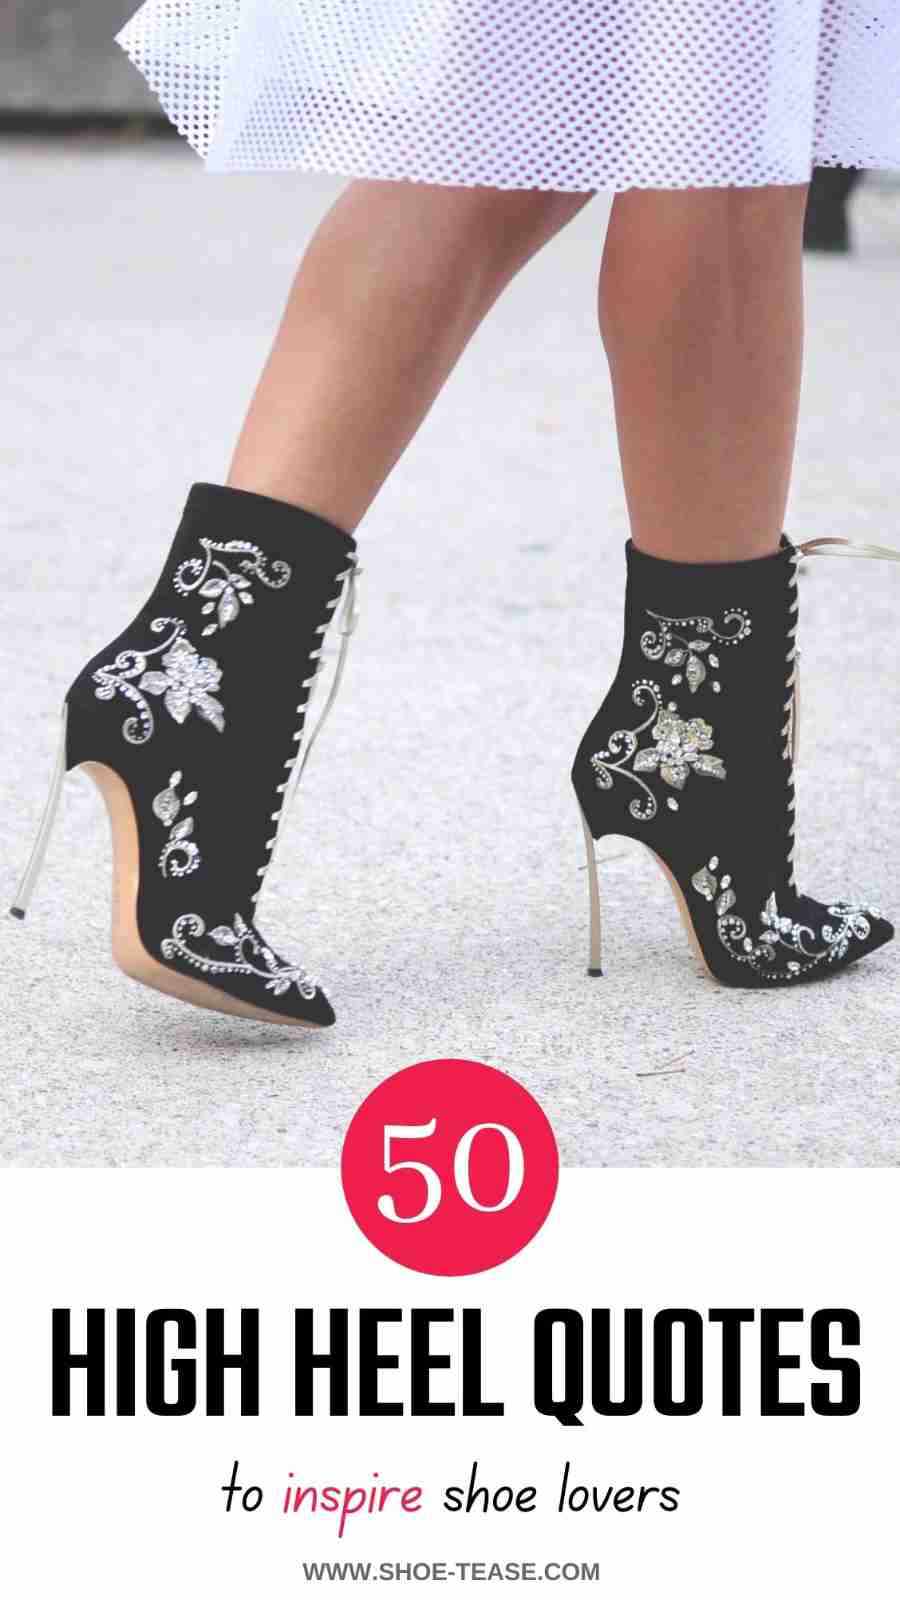 Text "50 High heels quotes to inspire shoe lovers" under image of close up womans stiletto embroidered black booties.